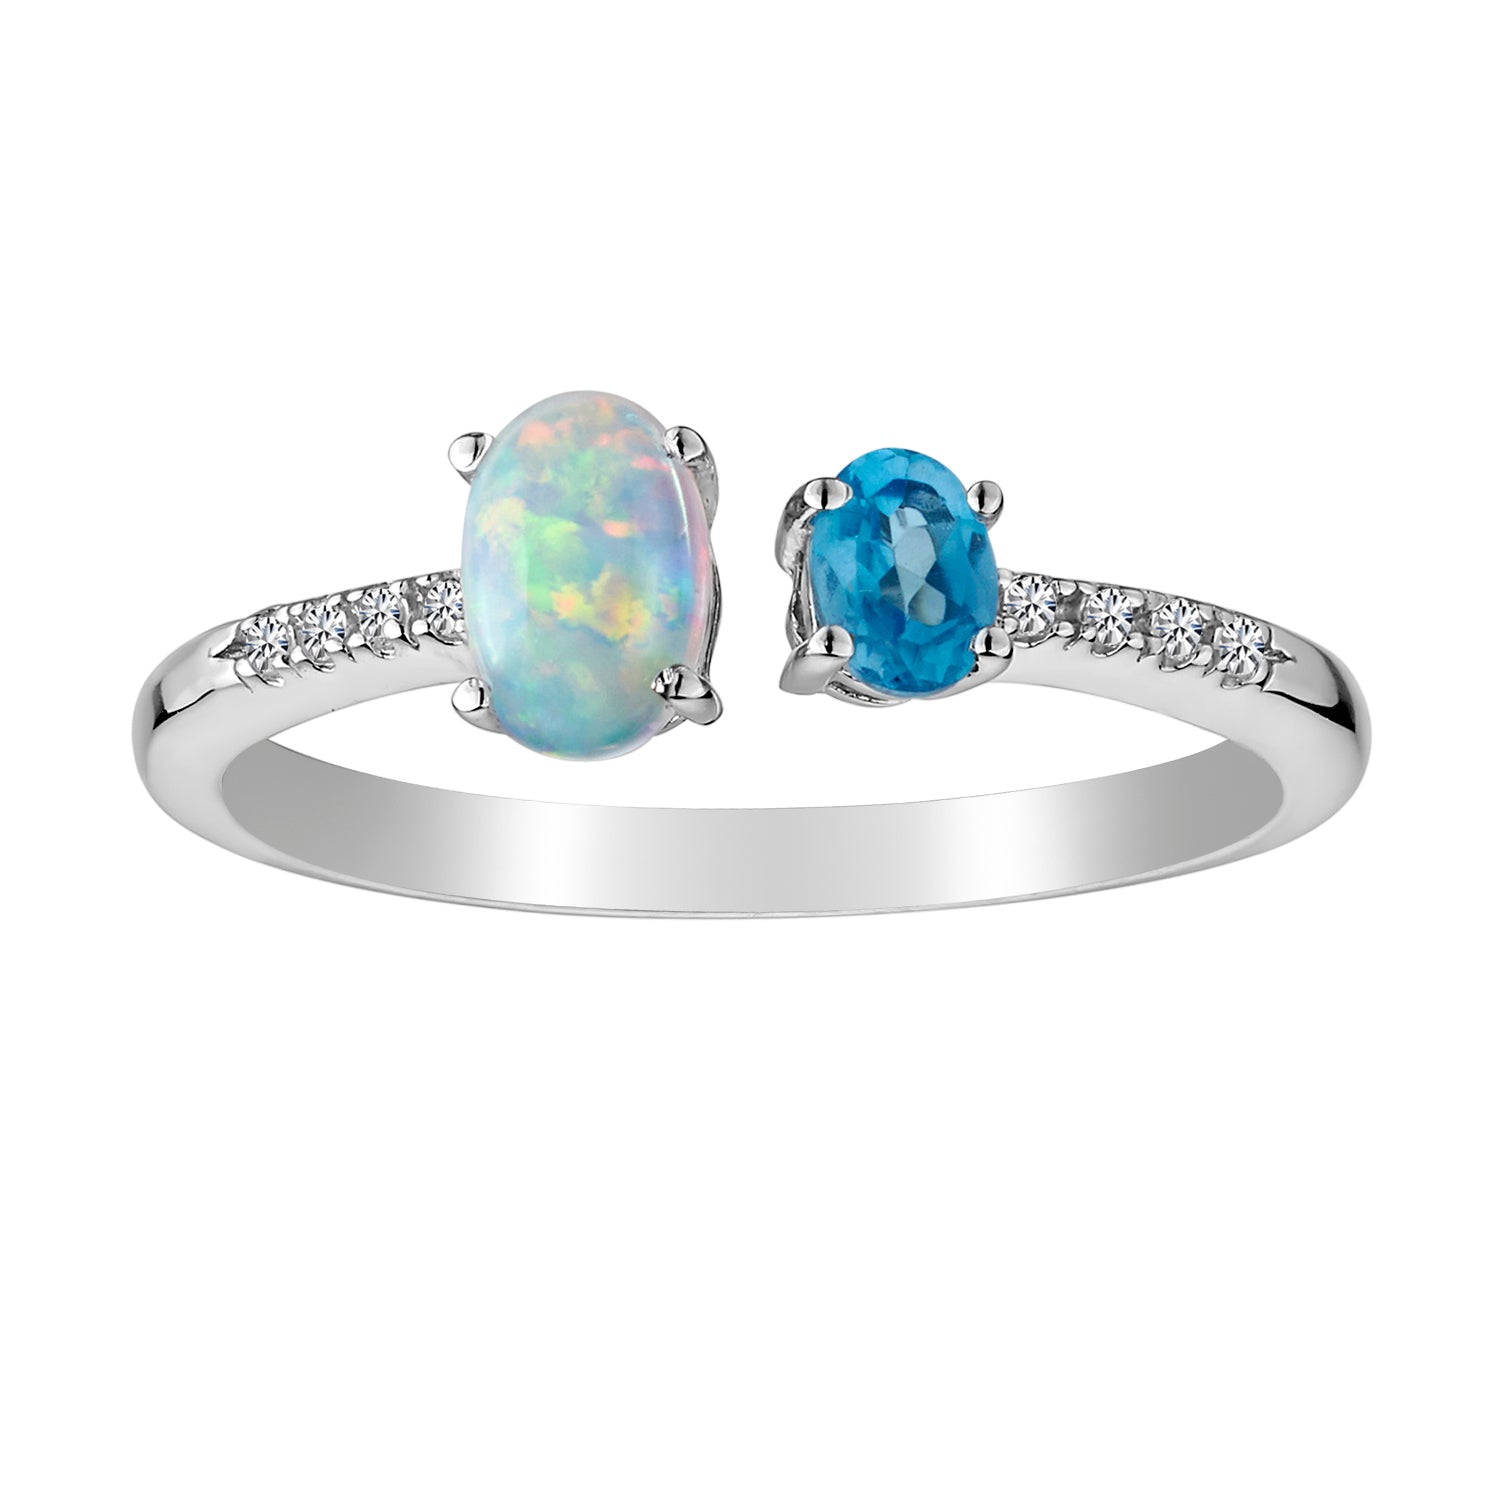 Swiss Blue Topaz Created Opal & White Sapphire Ring, Silver....................NOW